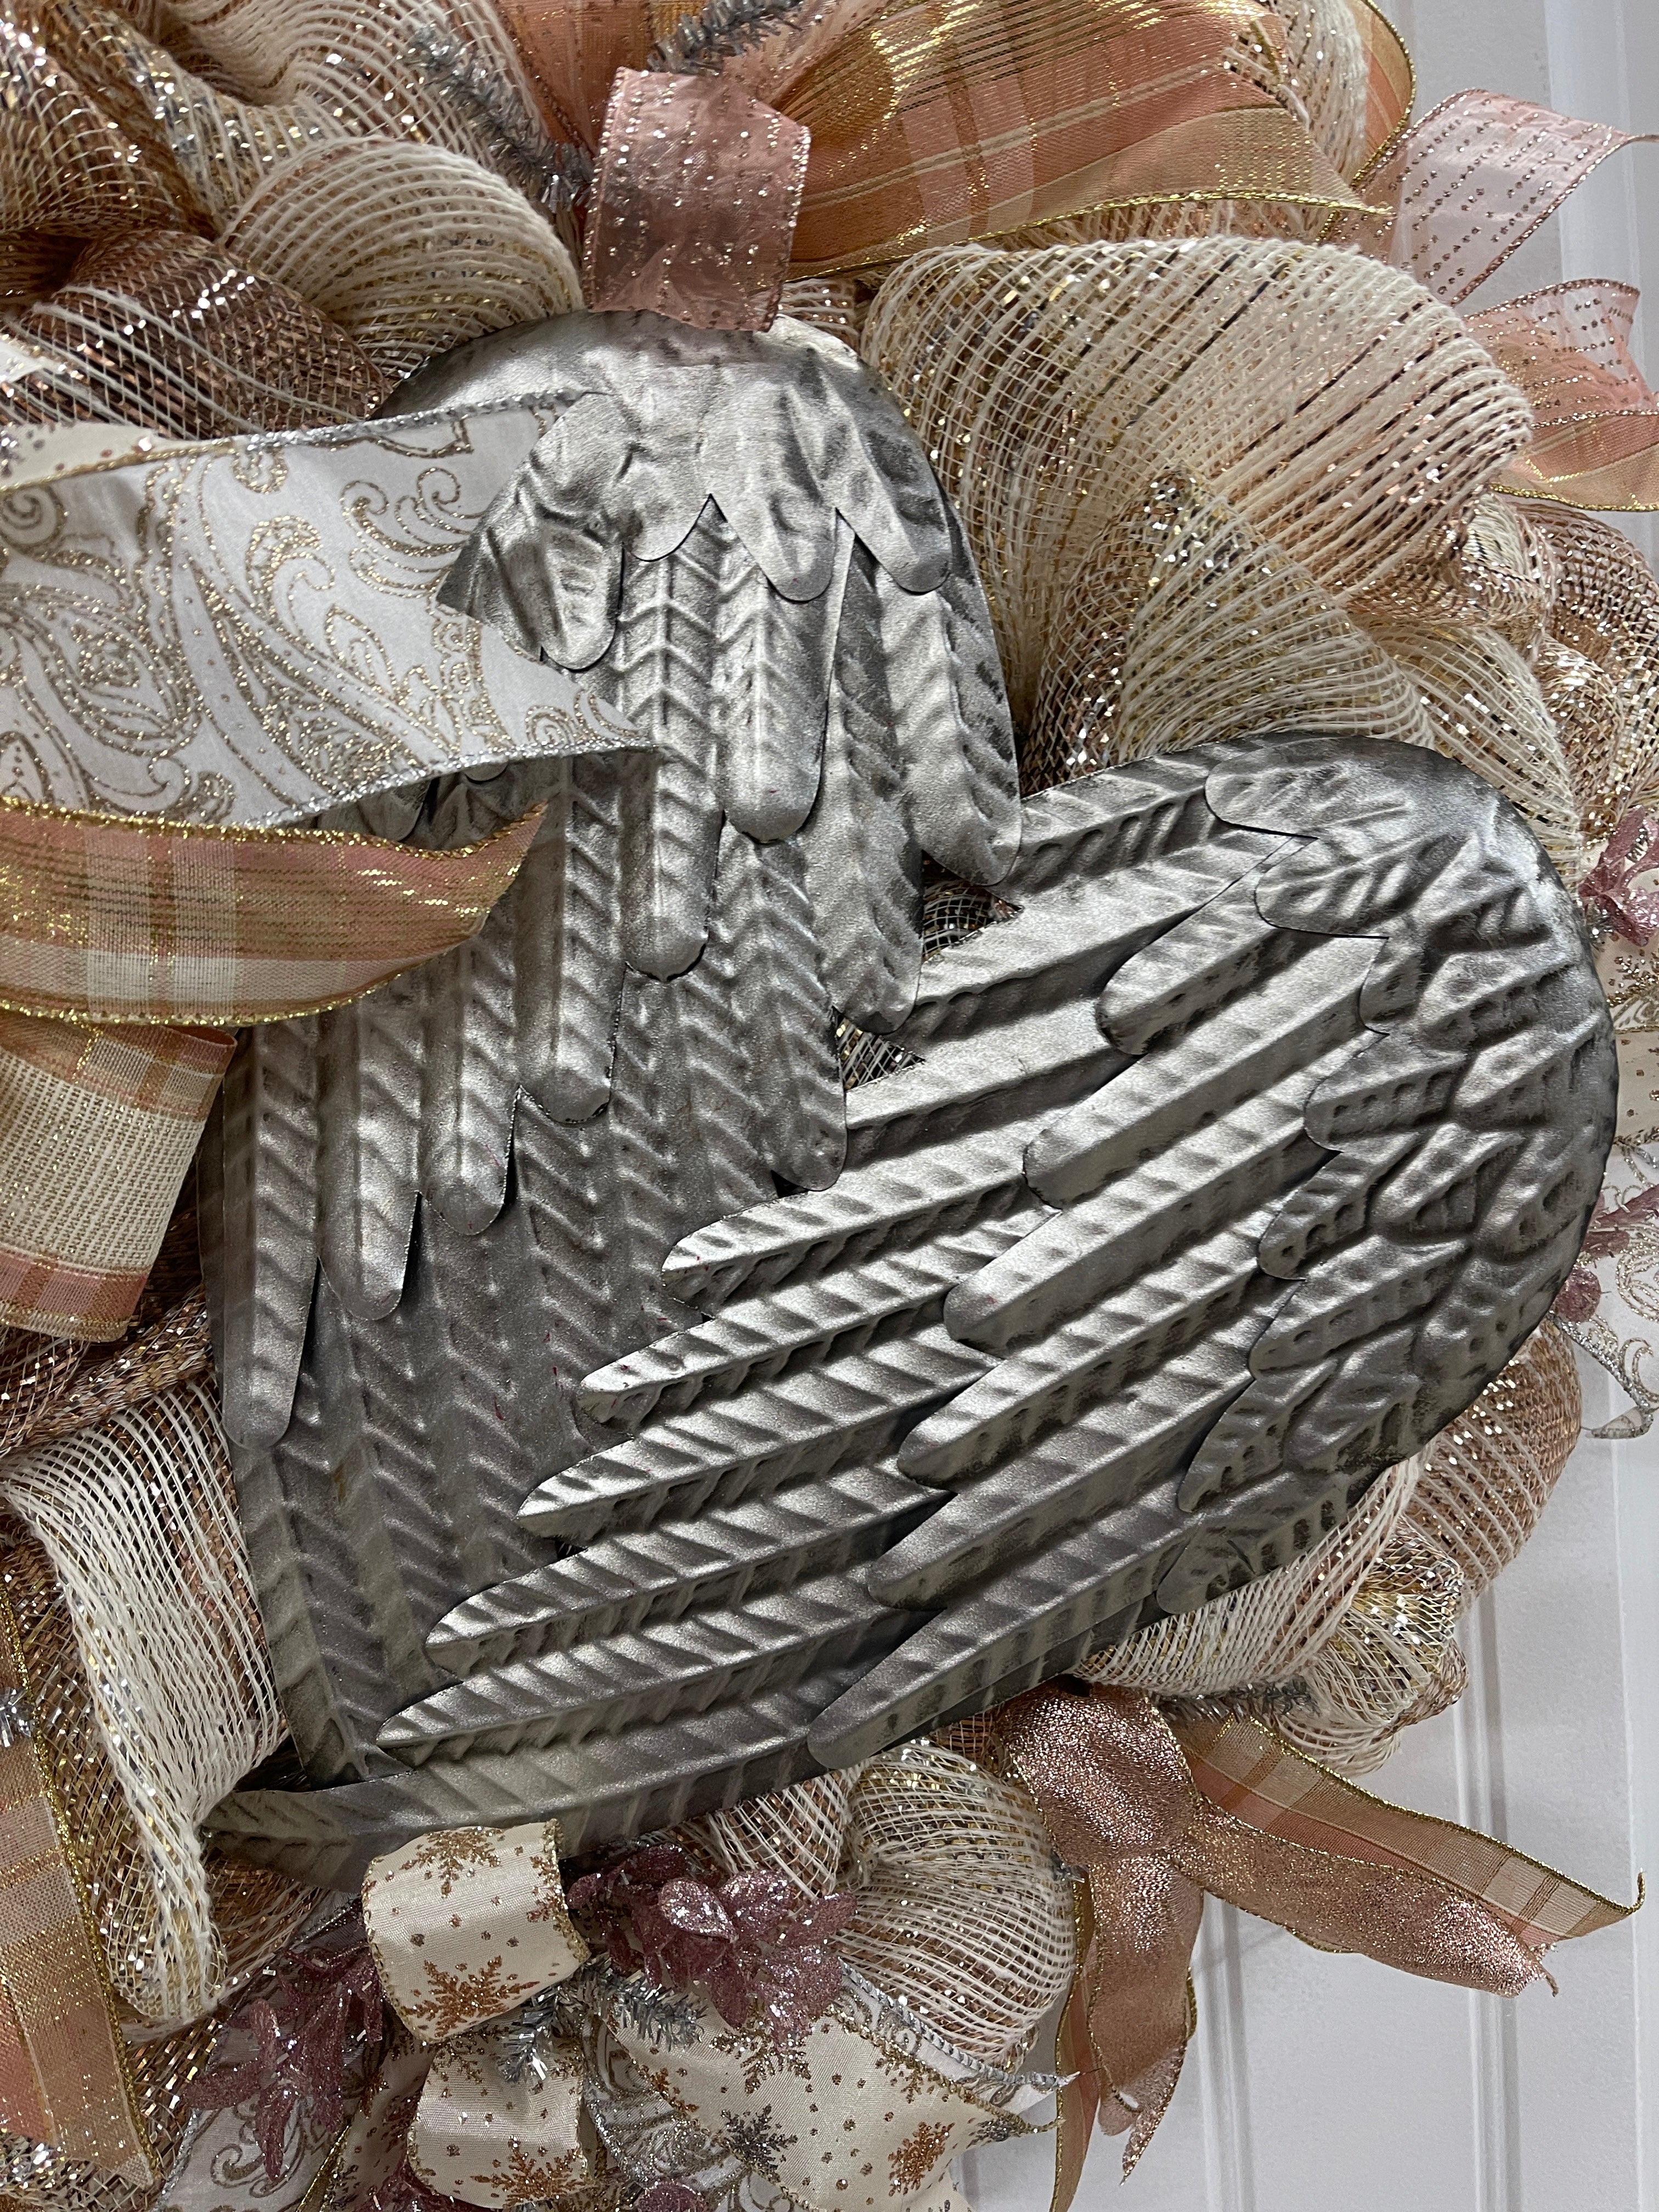 Close up on Antique Silver Folded Angel Wings on Wreath